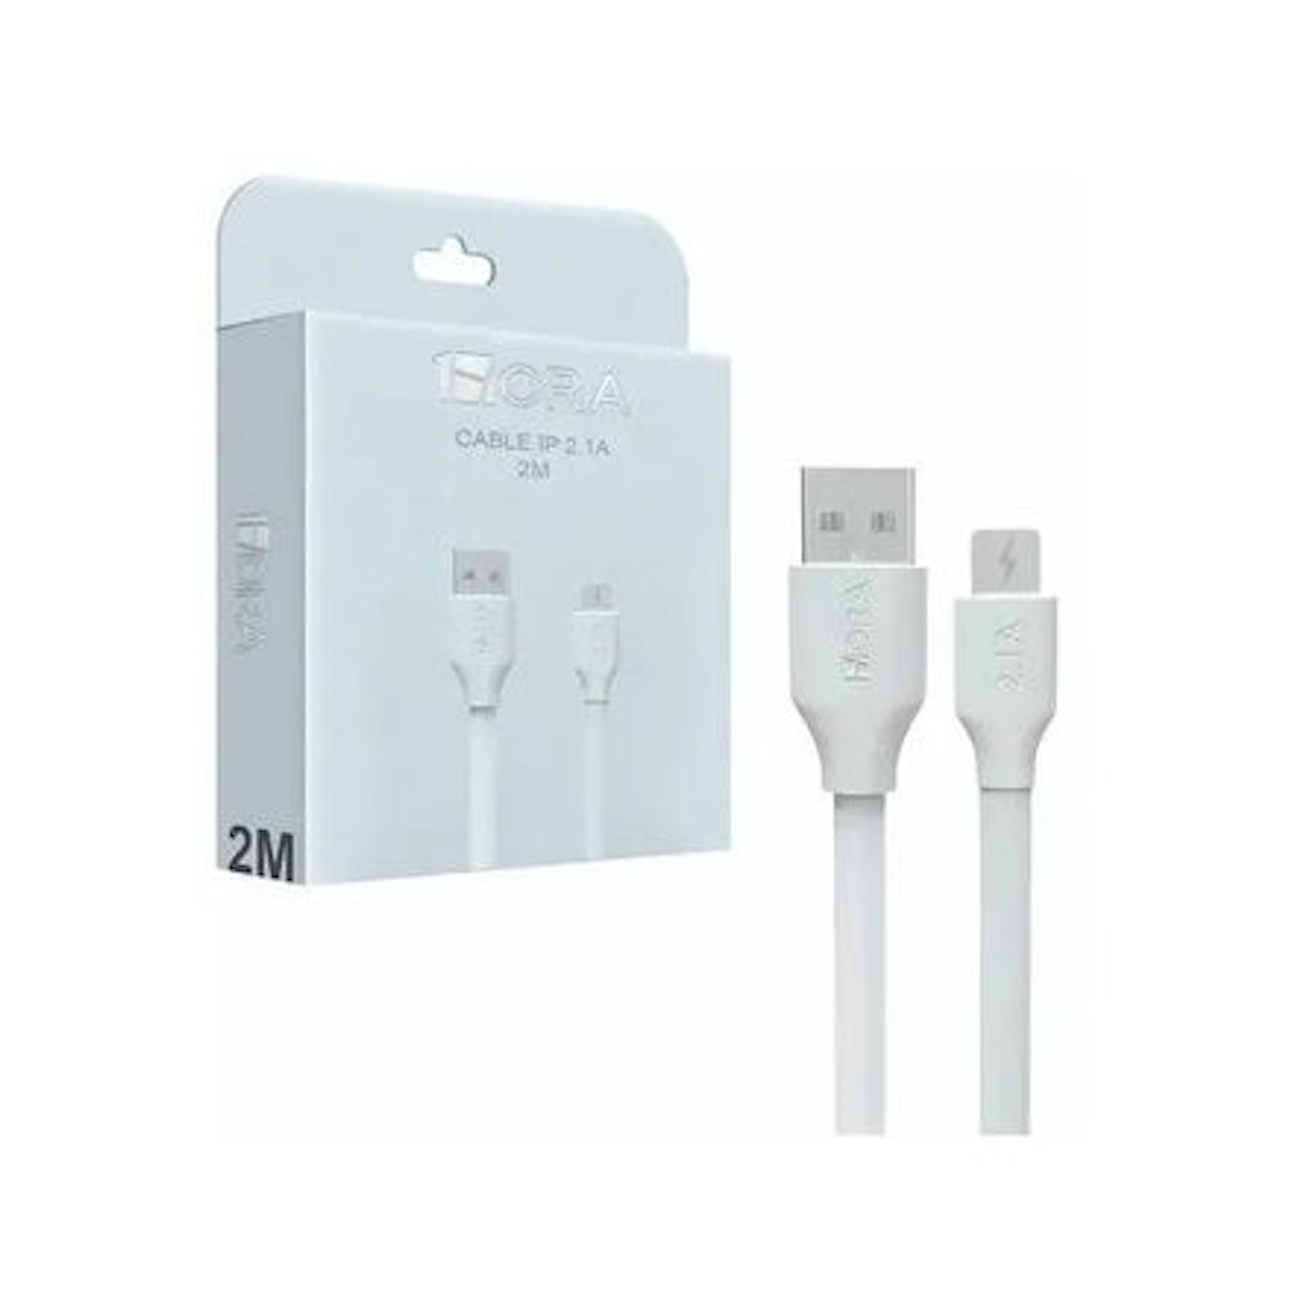 Paquete 2 Cables 1 Hora 2m 1x Tipo C, 1x Lightning Negro Combo Pack Kit Set